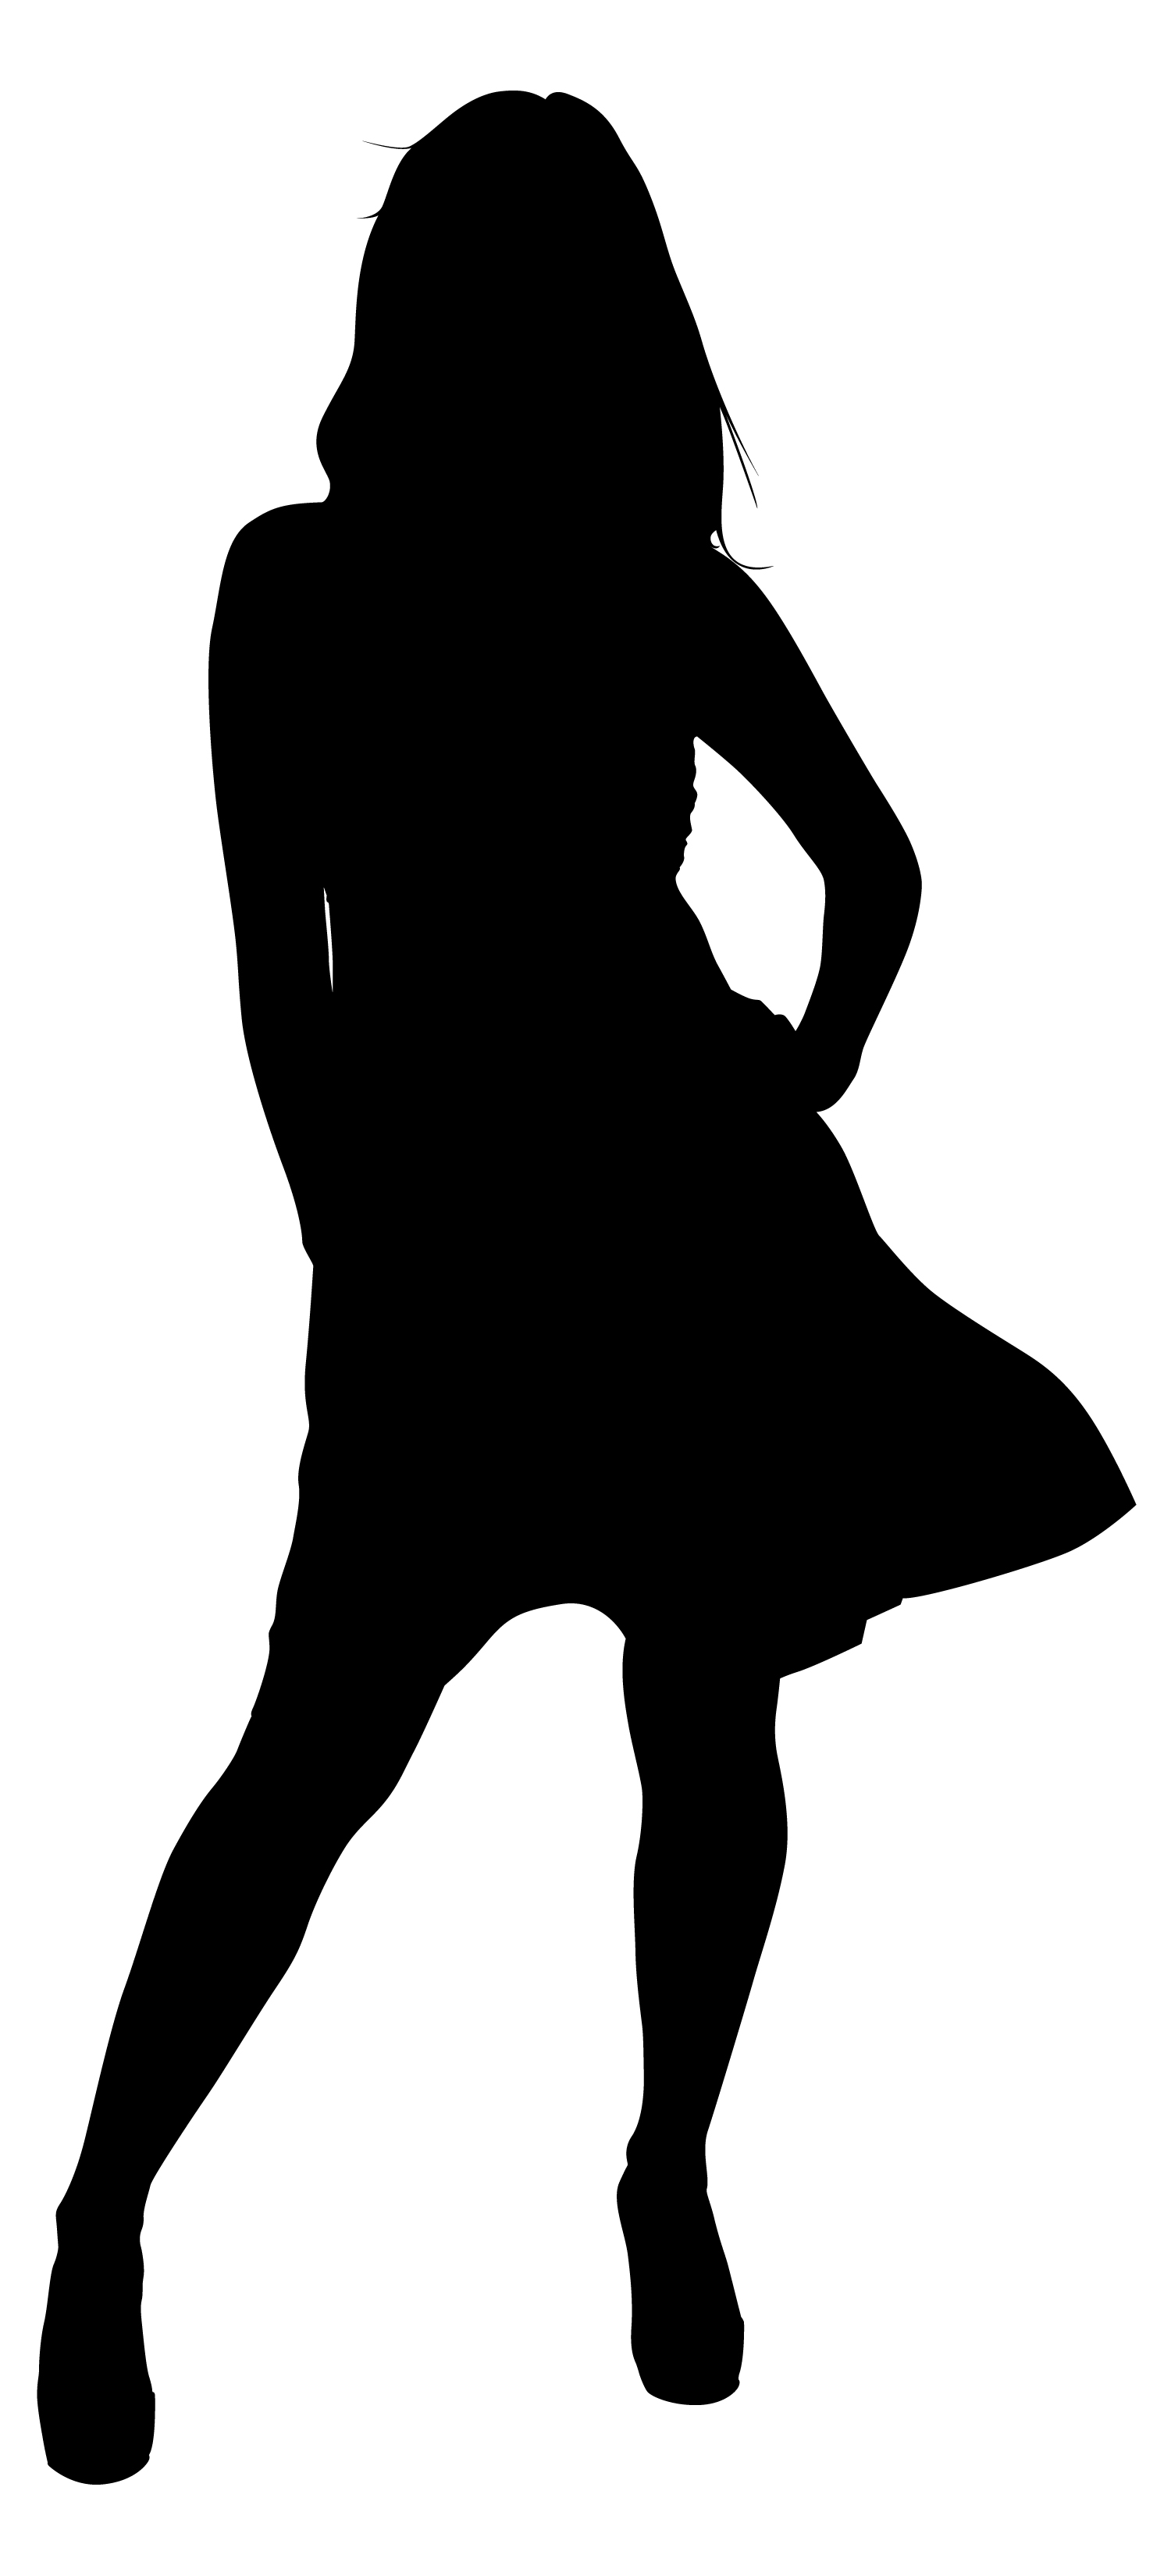 Free Woman Silhouette Images Download Free Clip Art F - vrogue.co